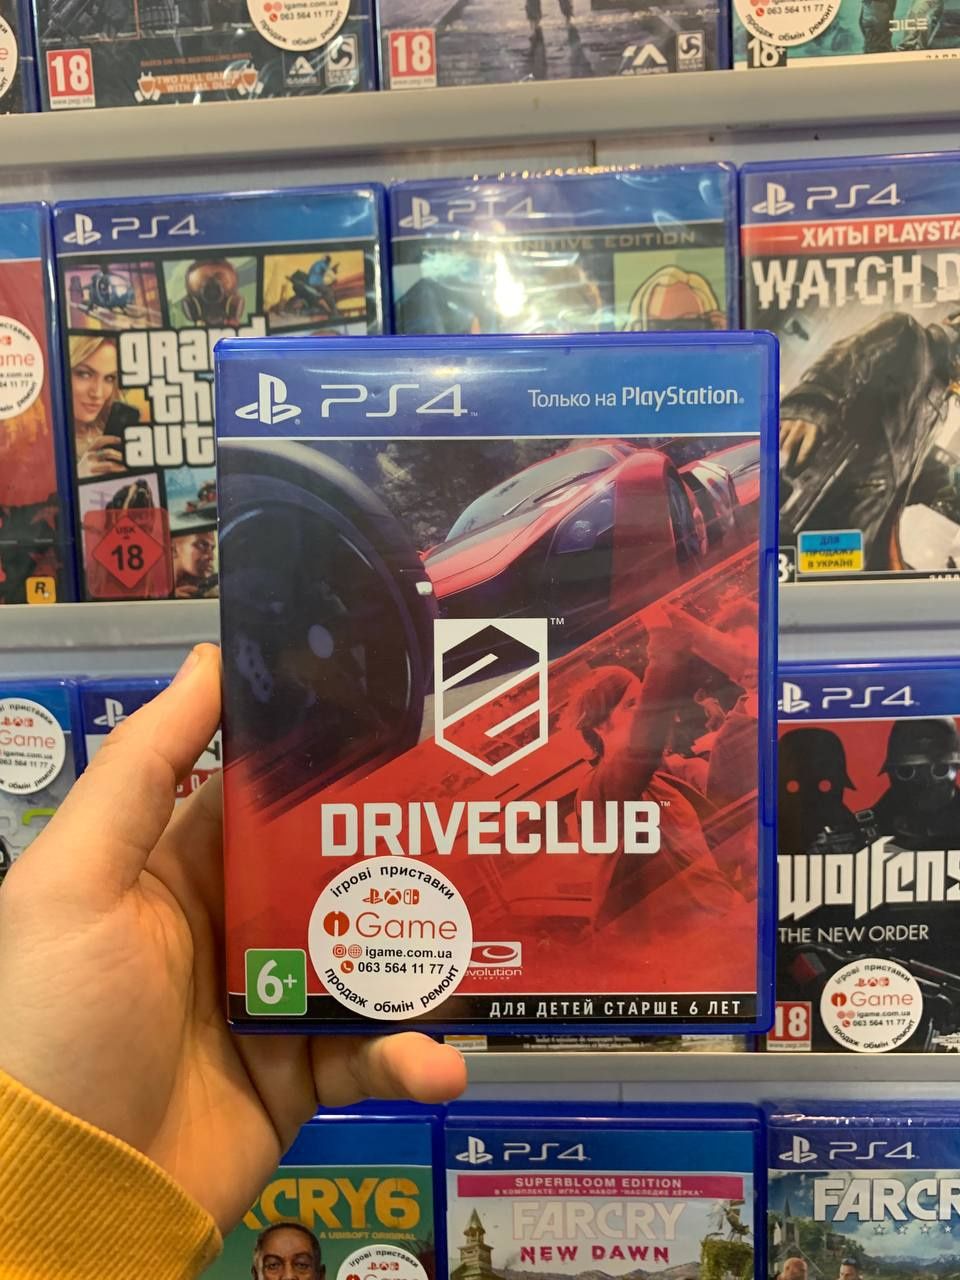 DriveClub, Ps4, Ps5 Sony Playstation, drive, igame